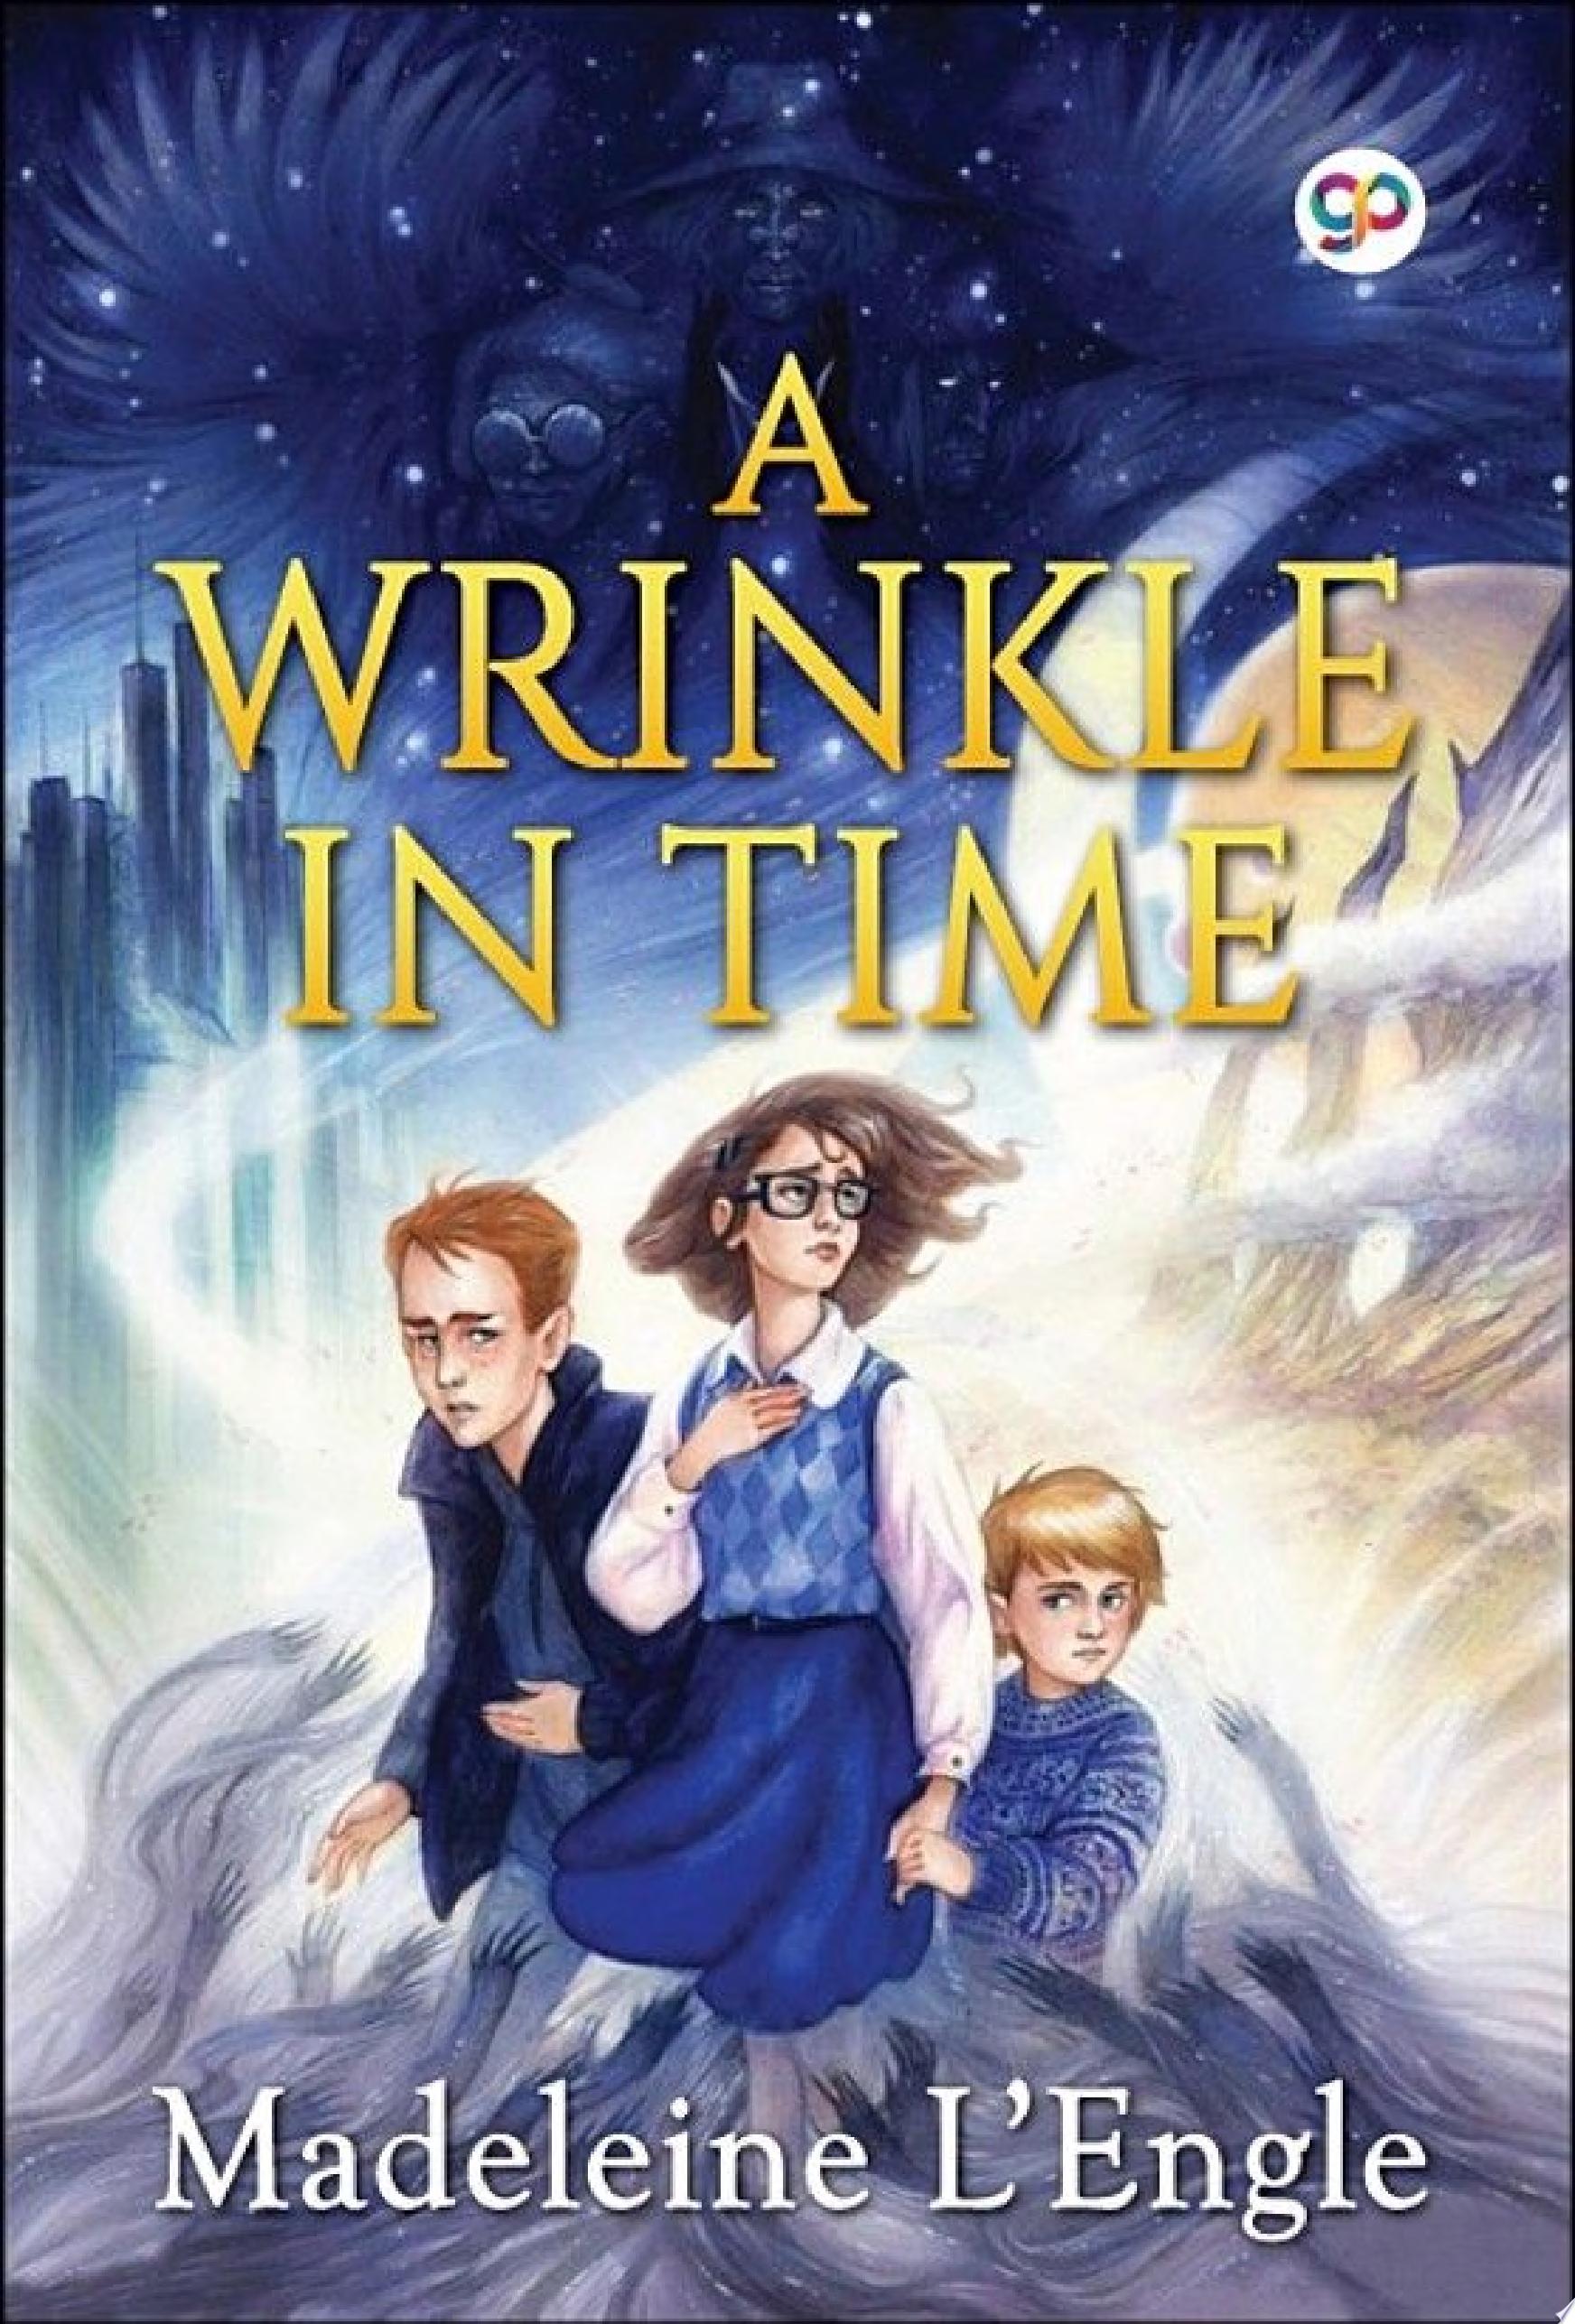 Image for "A Wrinkle in Time"